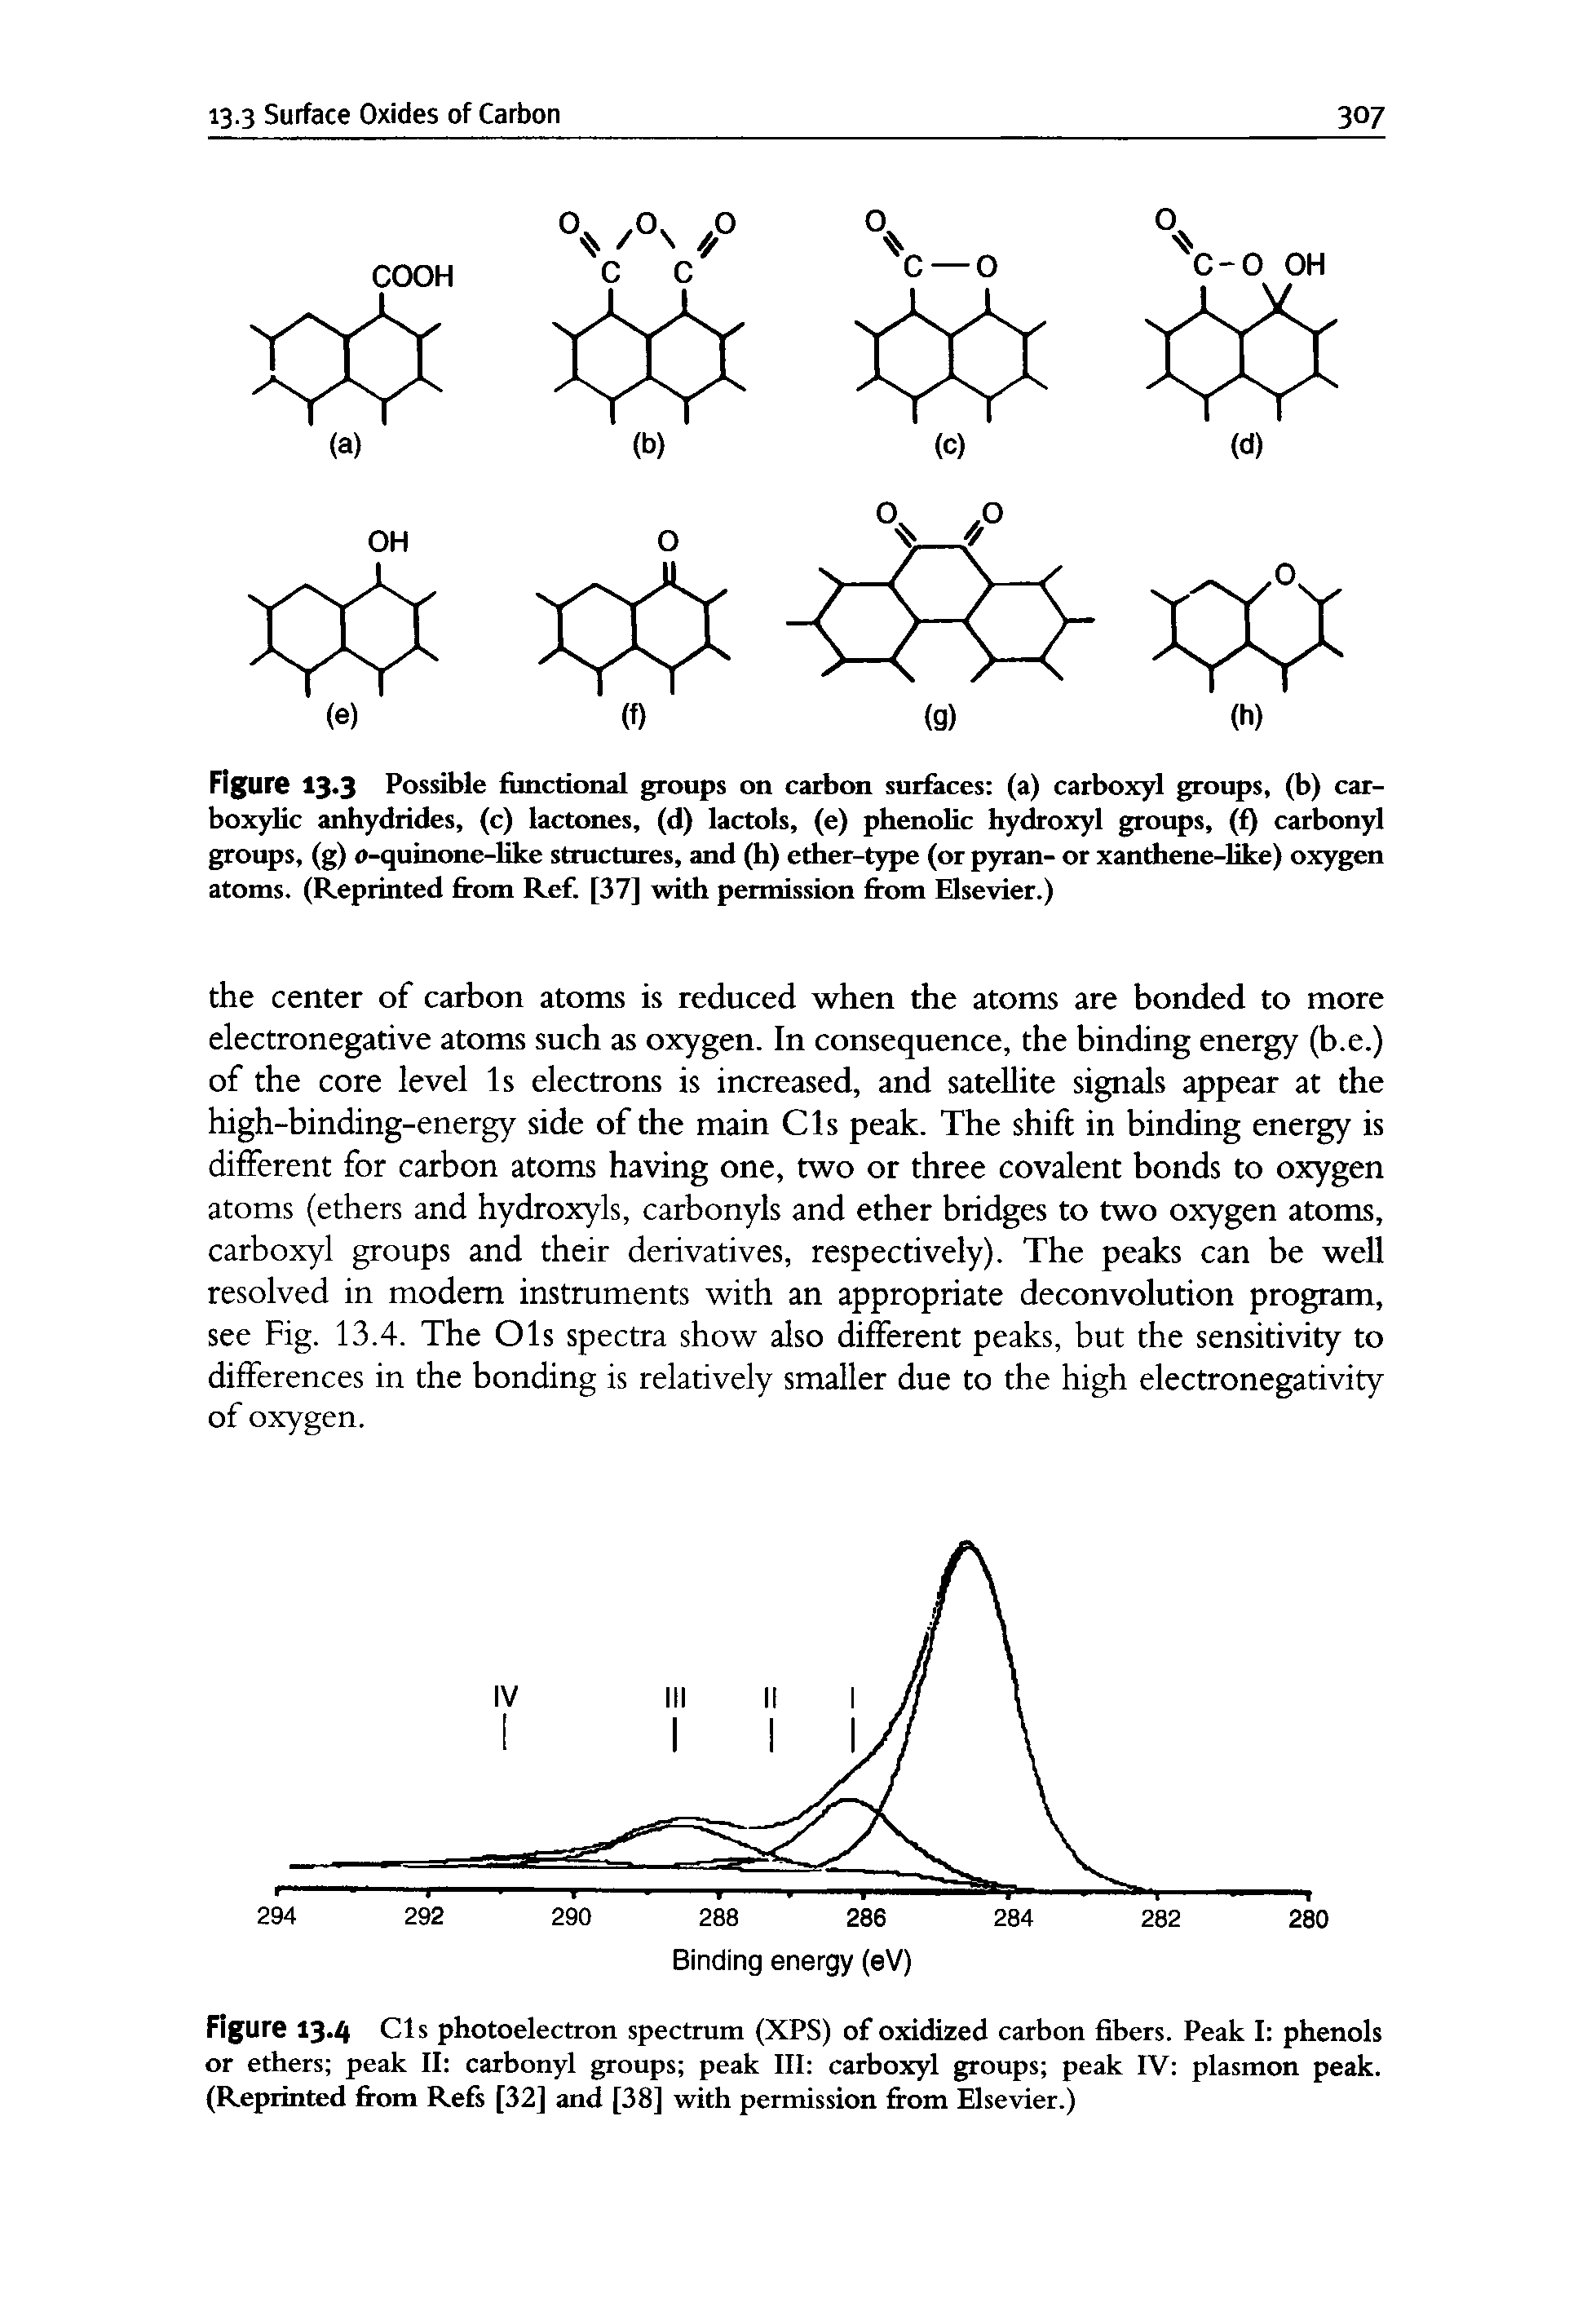 Figure 13 3 Possible functional groups on carbon surfaces (a) carboxyl groups, (b) carboxylic anhydrides, (c) lactones, (d) lactols, (e) phenolic hydroxyl groups, (f) carbonyl groups, (g) e-quinone-hke structures, and (h) ether-type (or pyran- or xanthene-like) oxygen atoms. (Reprinted from Ref. [37] with permission from Elsevier.)...